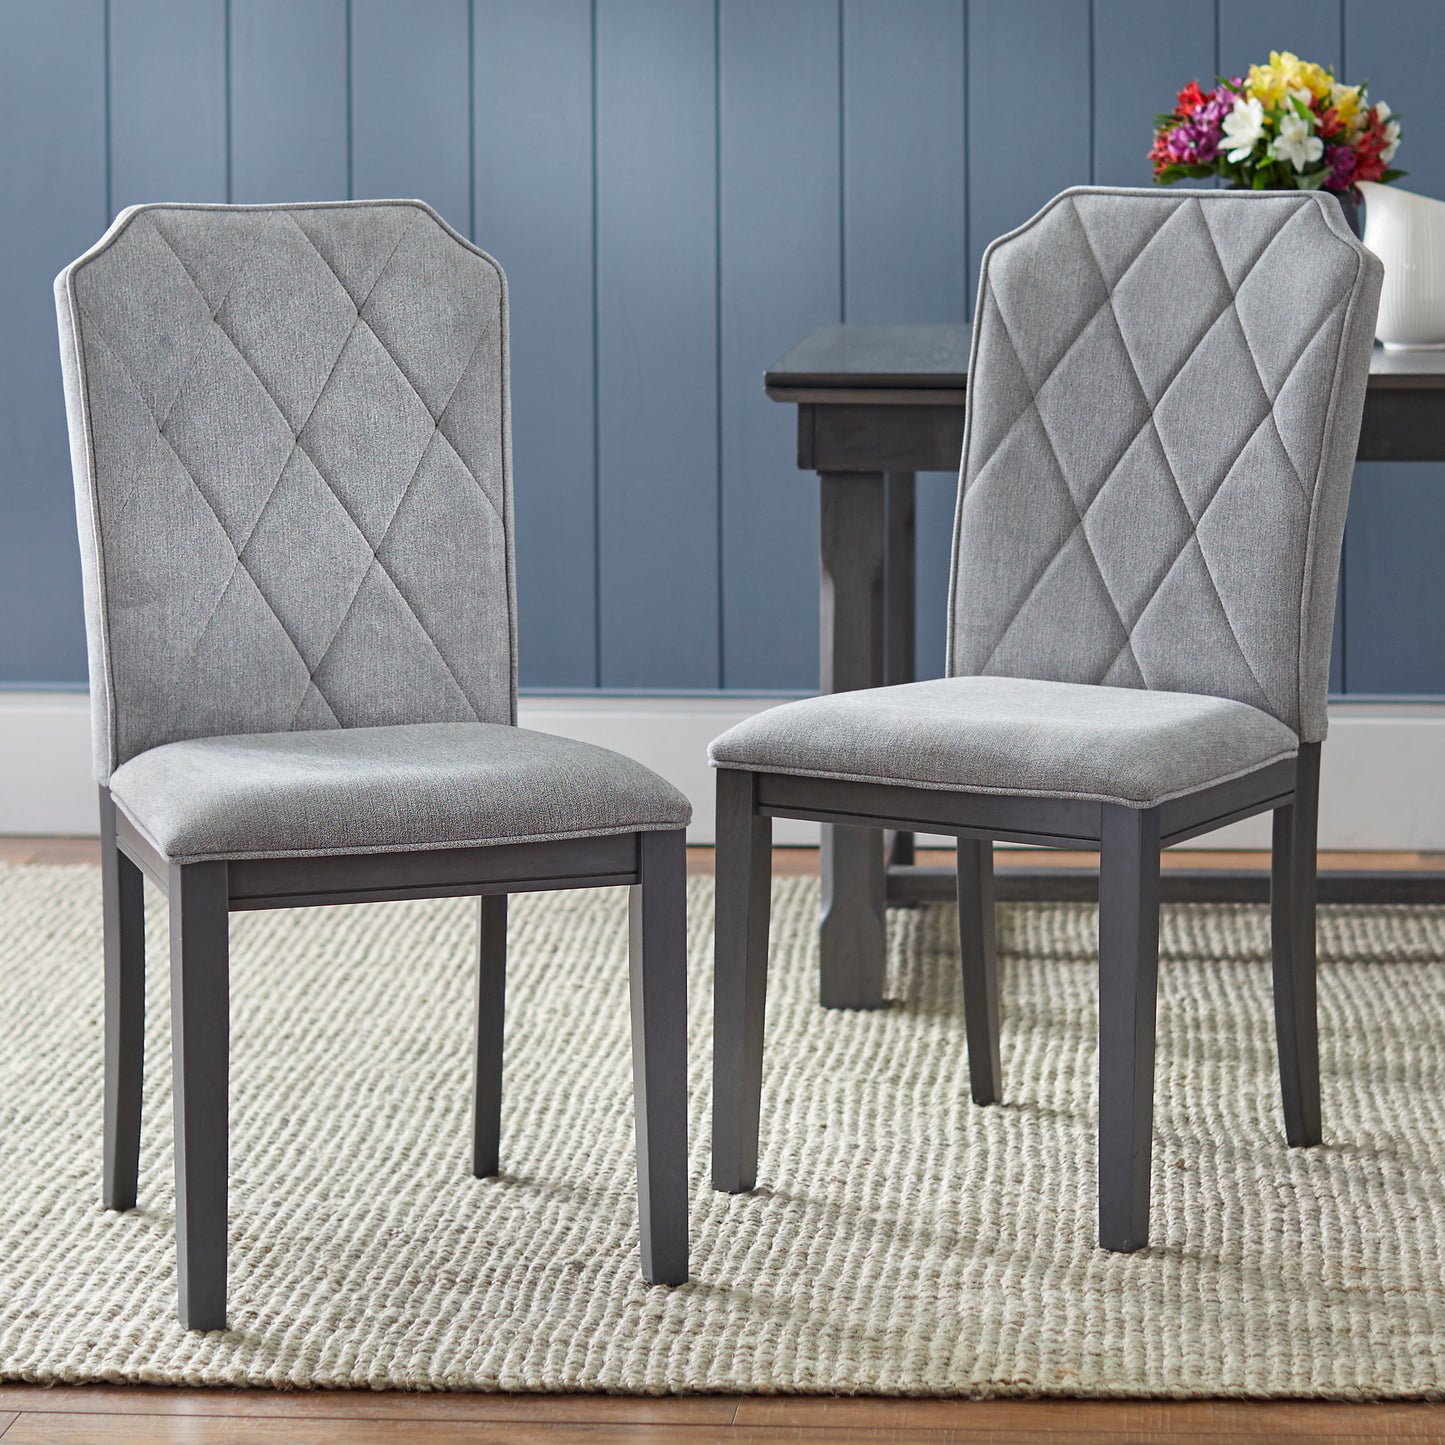 Dining Chairs - Riga (set of 2)